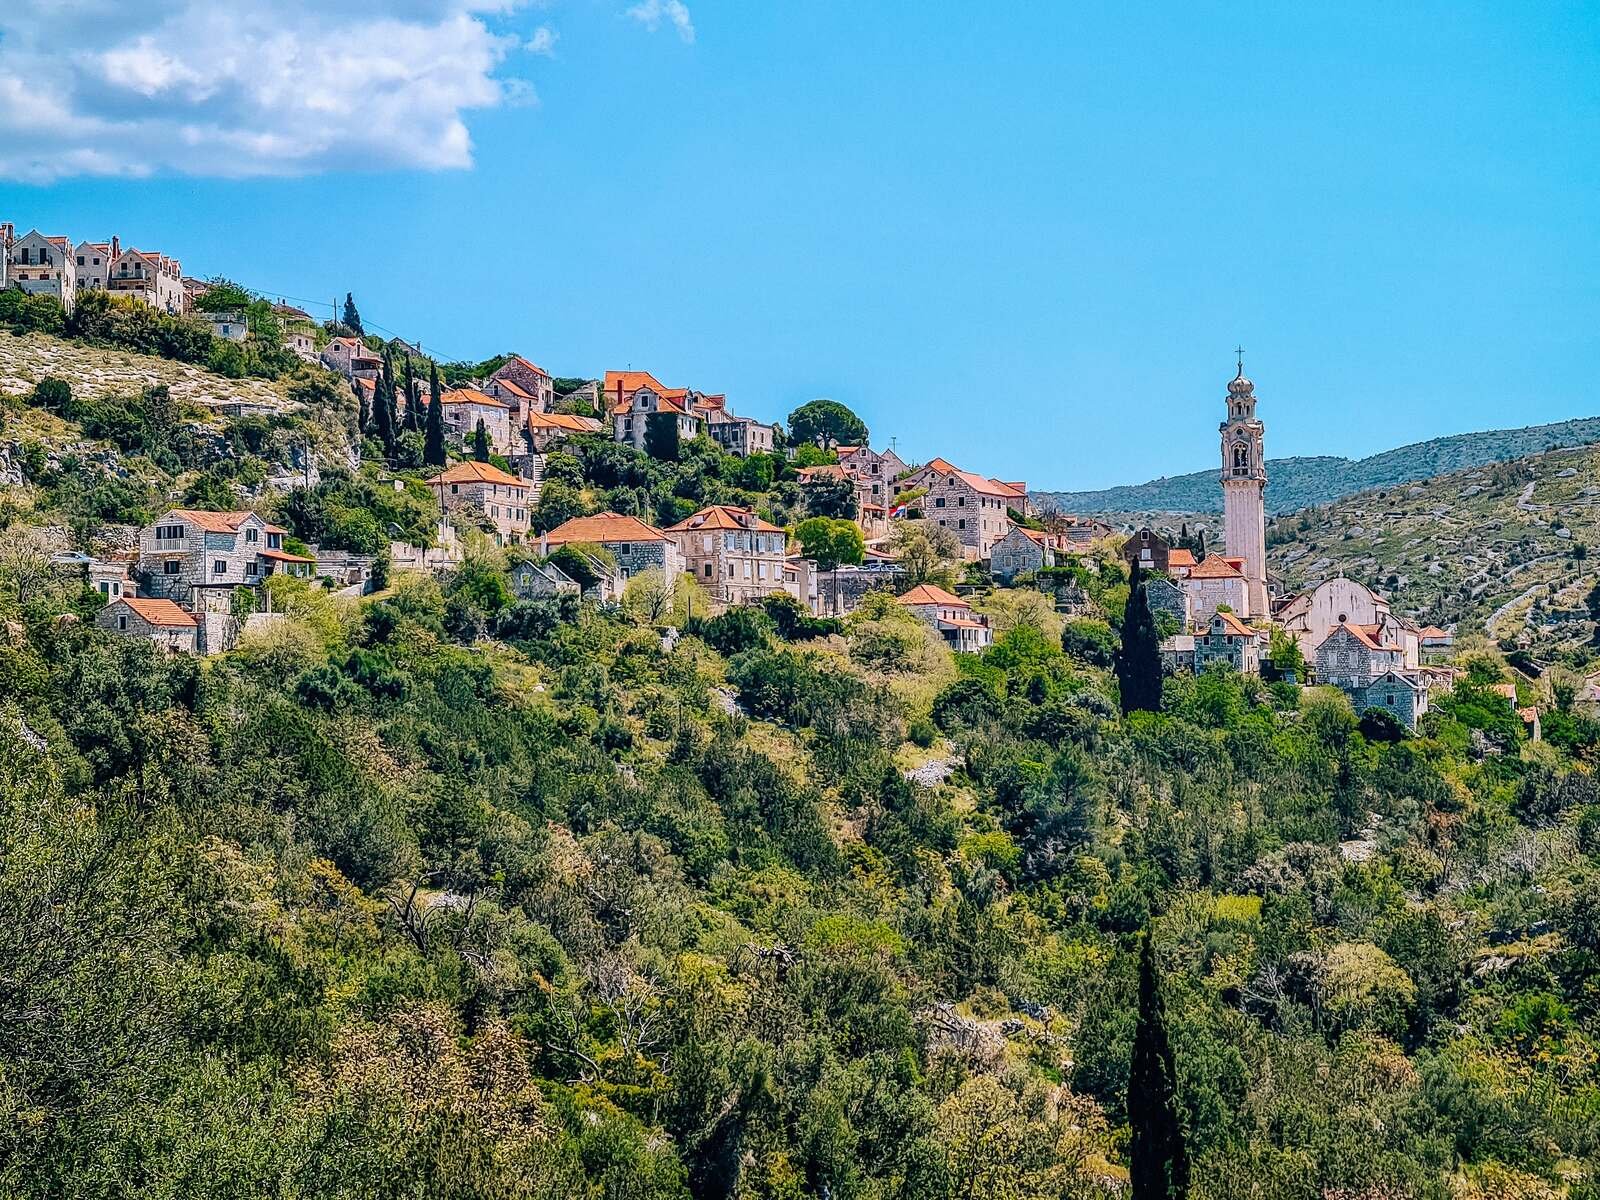 A small village settlement on a hillside surrounded by greenery. Several stone houses with orange roofs can be seen and a bell tower of a church